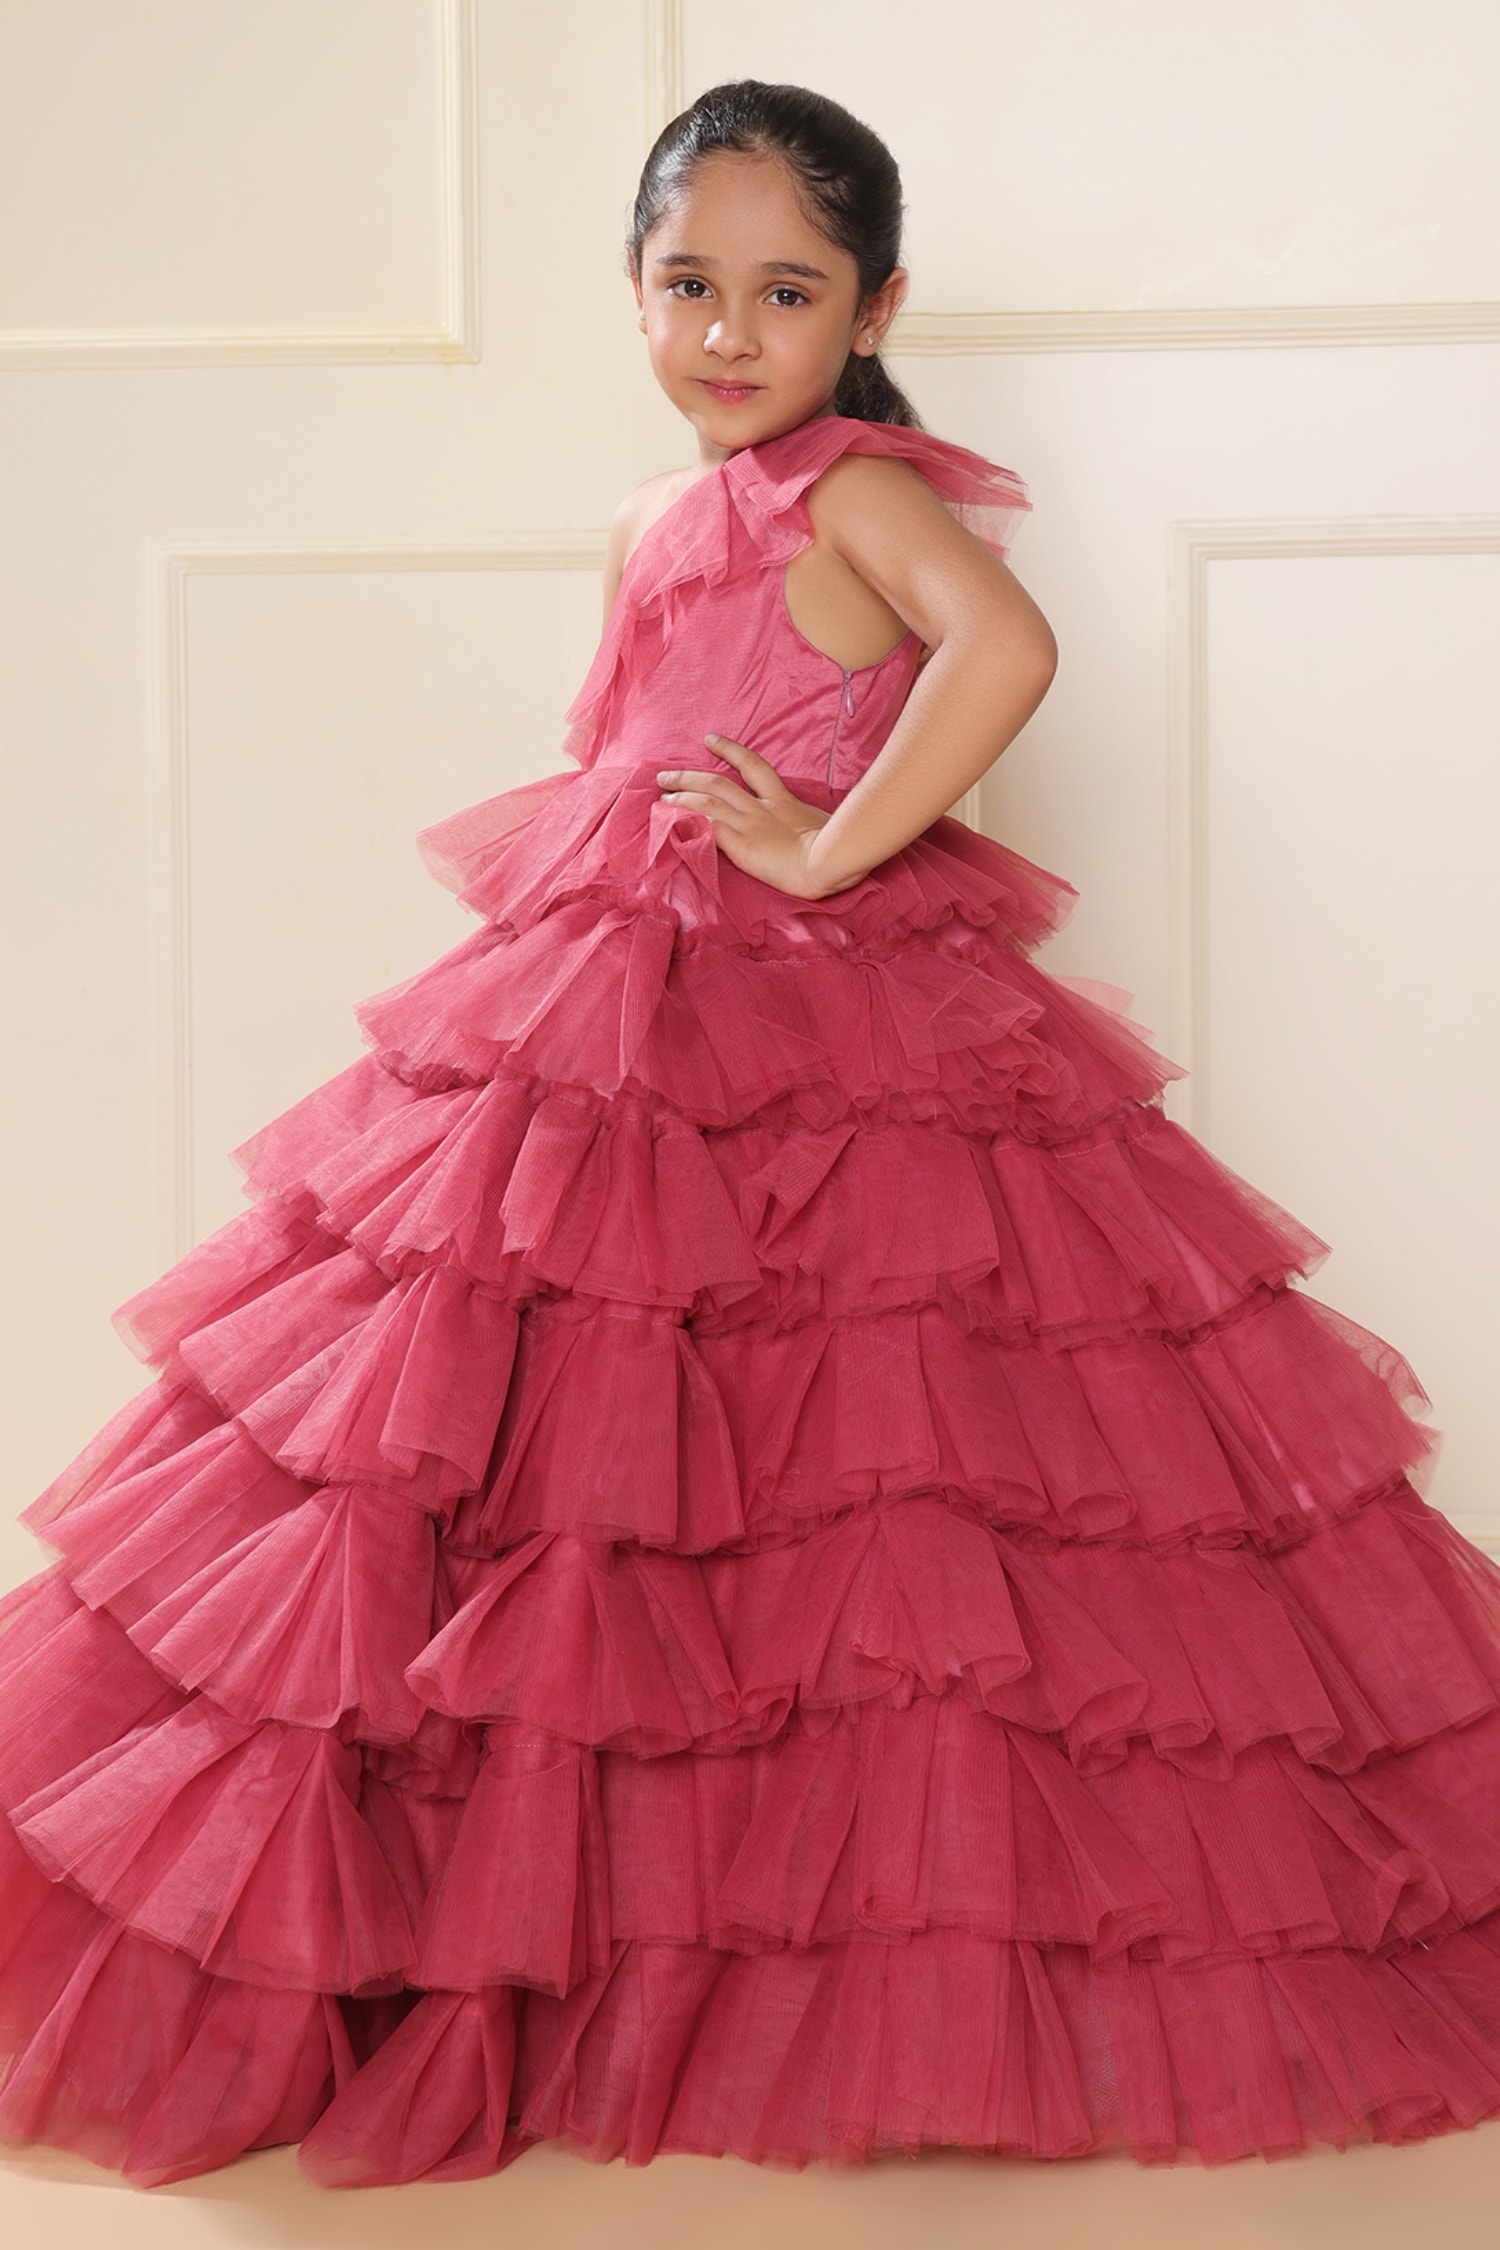 Chic / Beautiful Watermelon Flower Girl Dresses 2017 Ball Gown V-Neck 3/4  Sleeve Appliques Lace